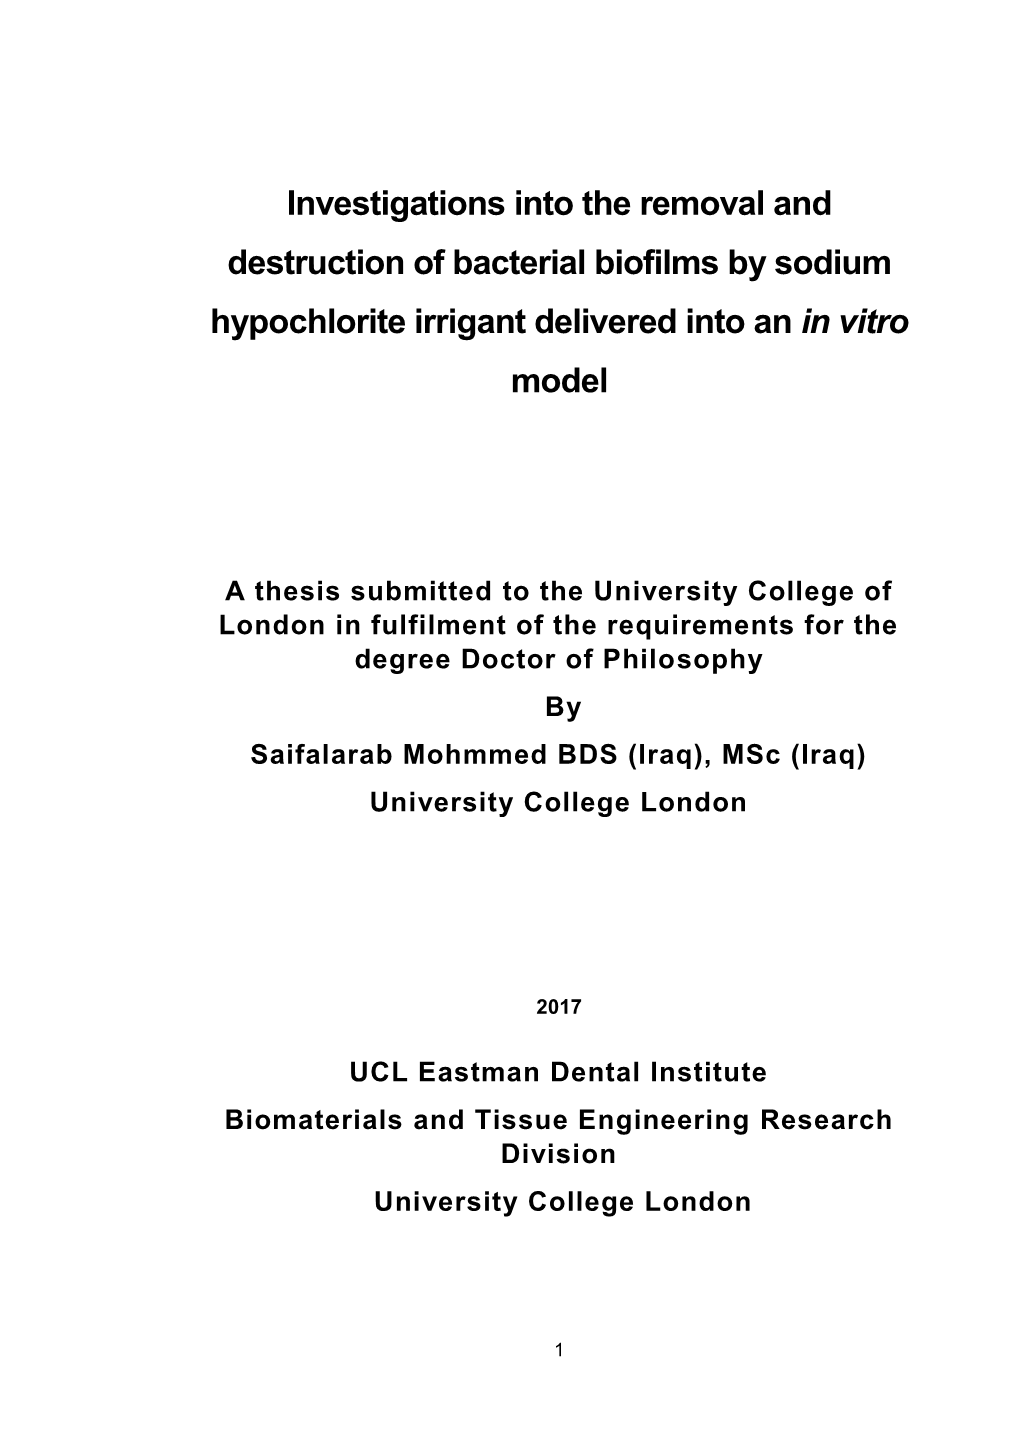 Investigations Into the Removal and Destruction of Bacterial Biofilms by Sodium Hypochlorite Irrigant Delivered Into an in Vitro Model